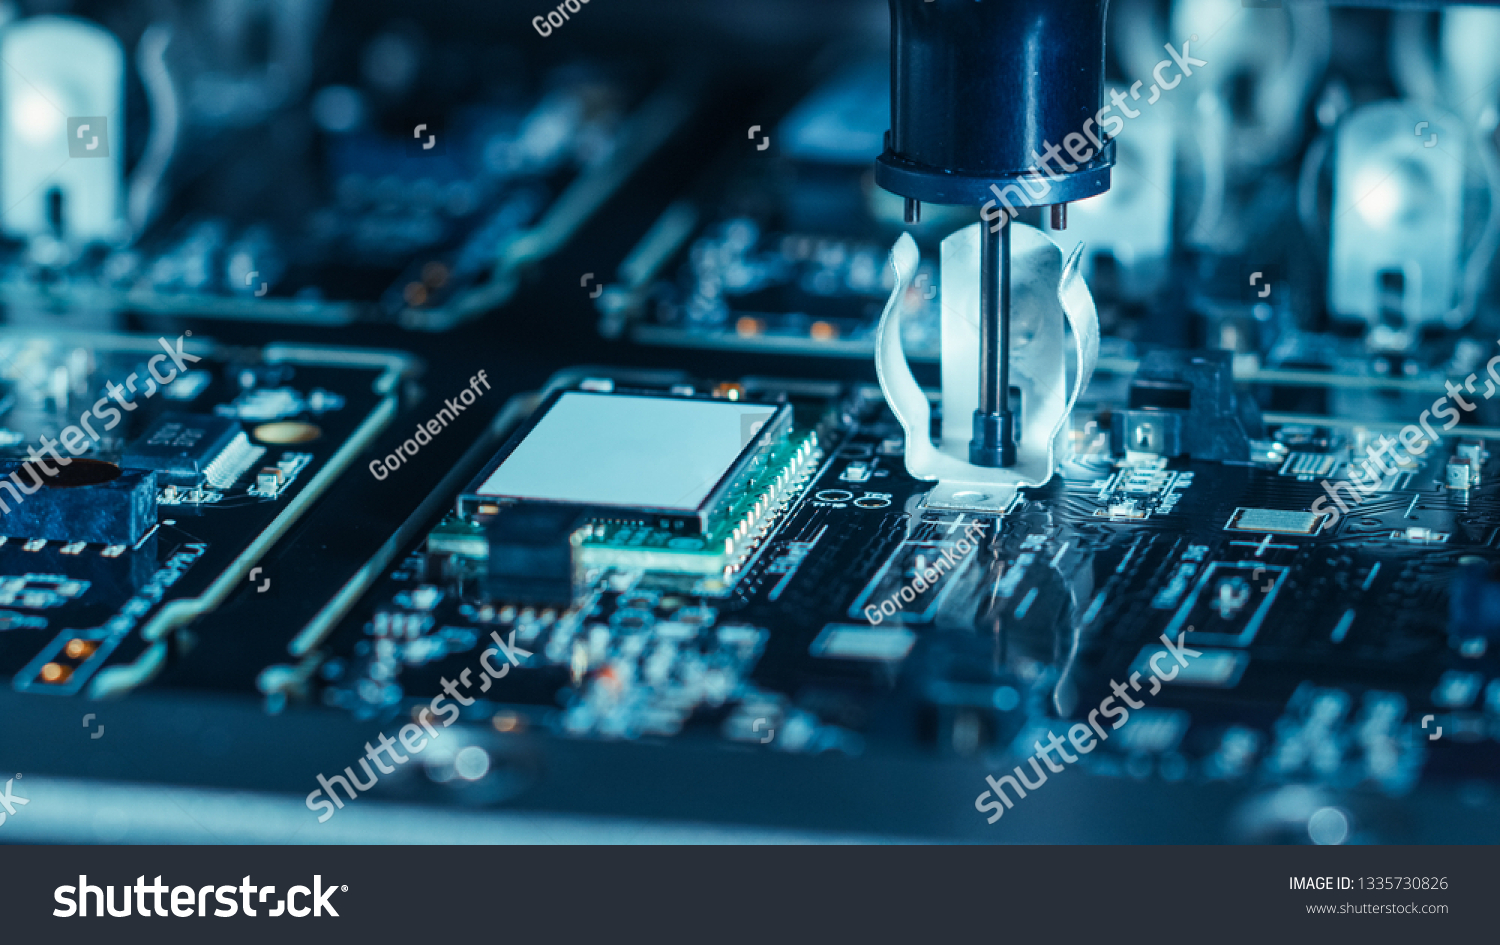 Close-up Macro Shot of Electronic Factory Machine at Work: Printed Circuit Board Being Assembled with Automated Robotic Arm, Place Technology Mounts Microchips to the Motherboard #1335730826